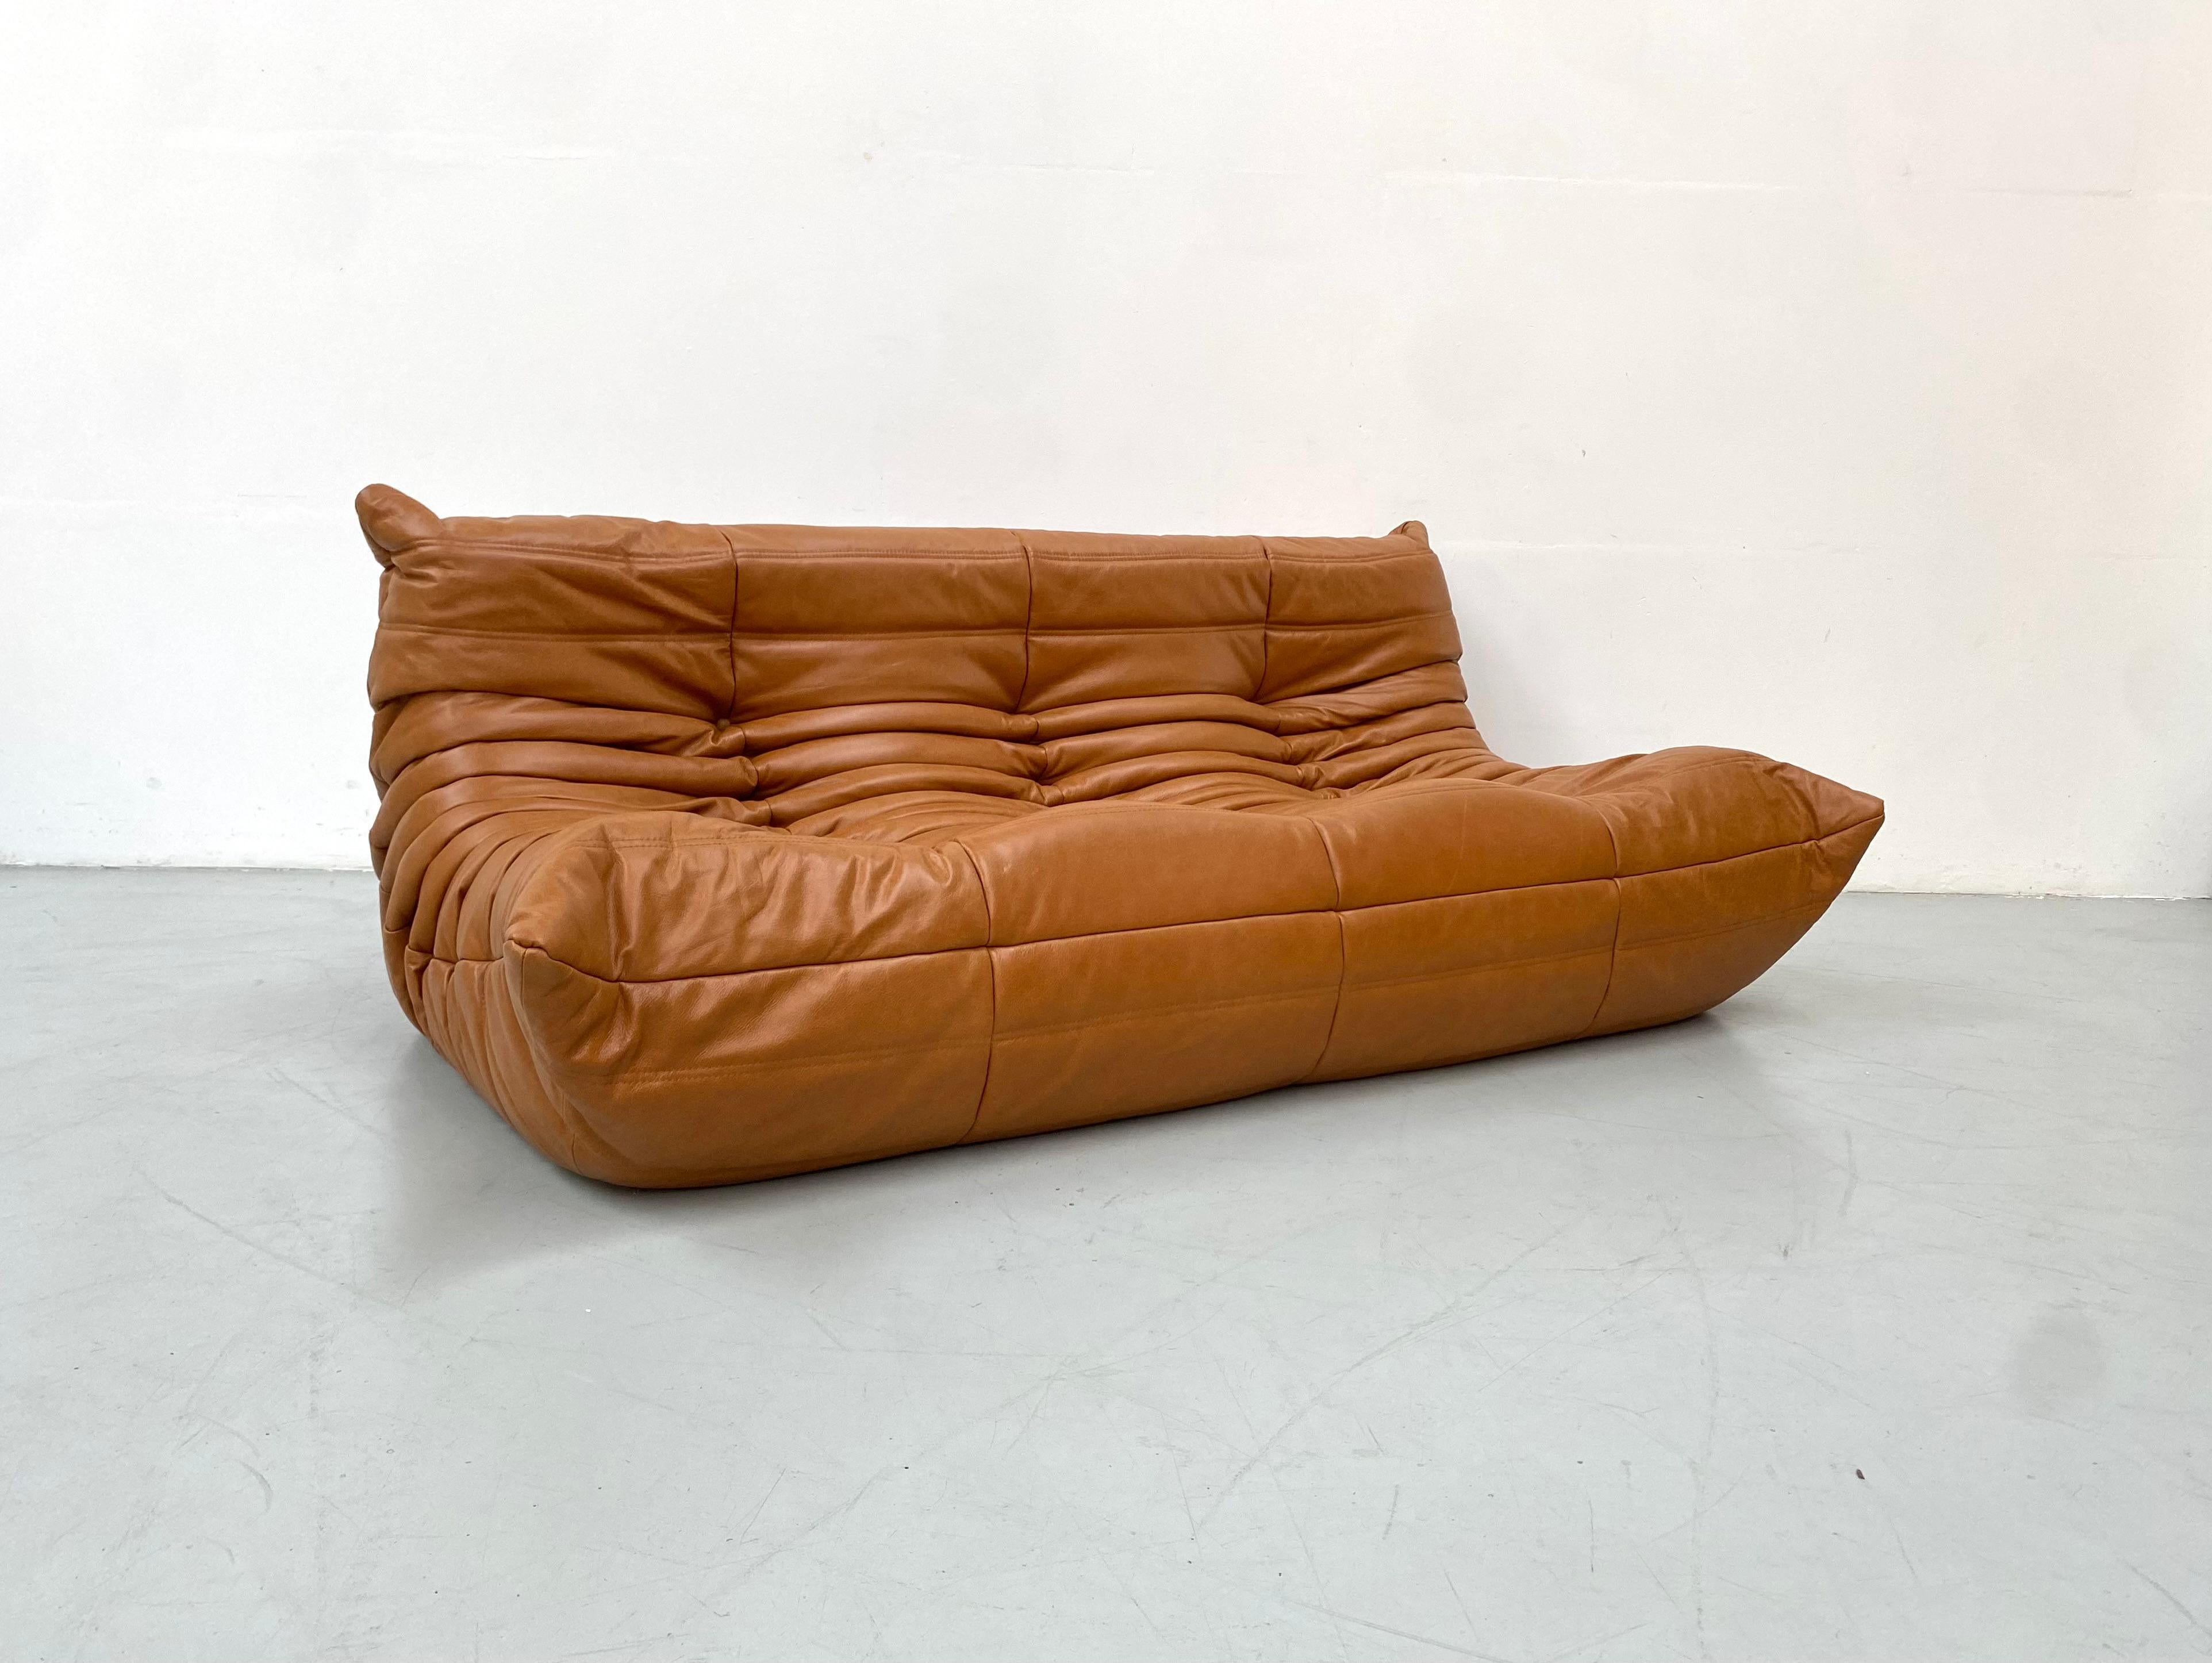 Mid-Century Modern French Vintage Togo Sofa in Brown Leather by Michel Ducaroy for Ligne Roset.